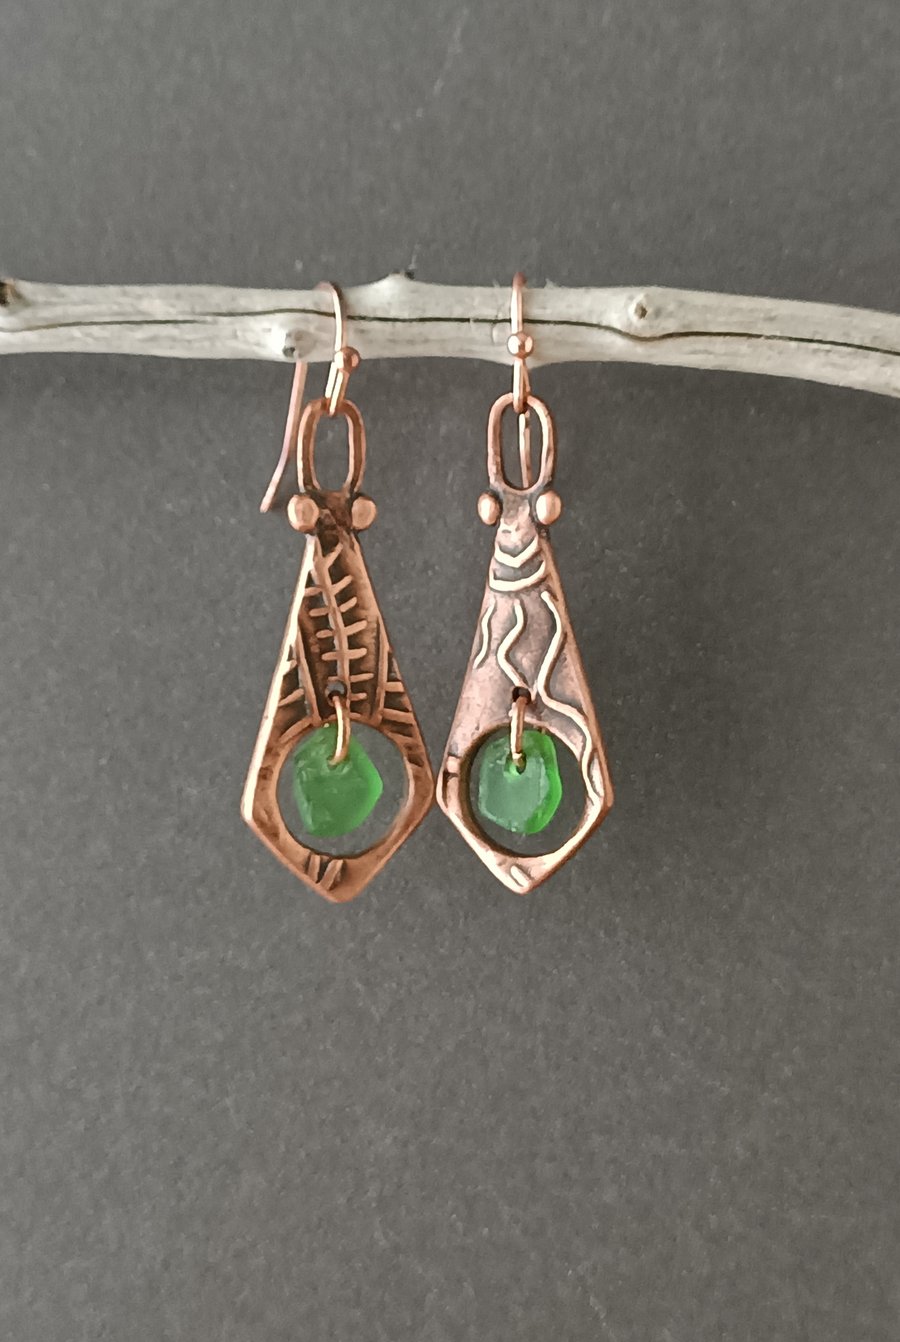 Copper and seaglass earrings - colour options, unique, recycled materials